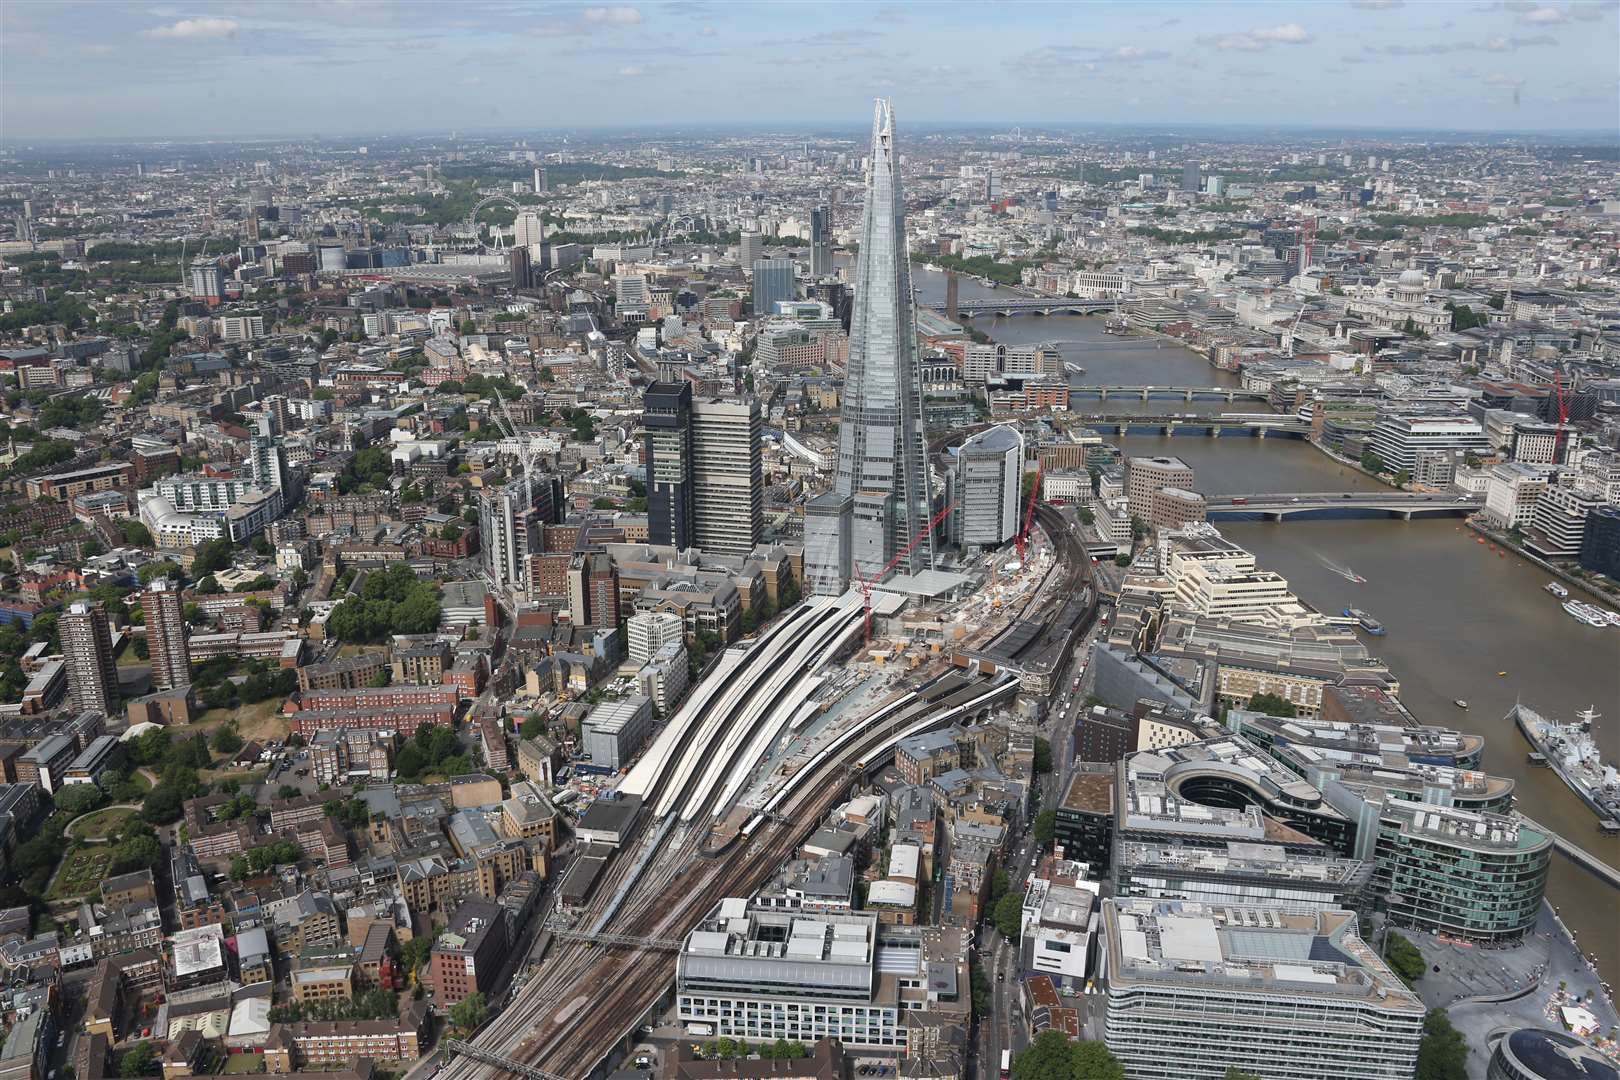 The new London Bridge station under construction, next to the Shard